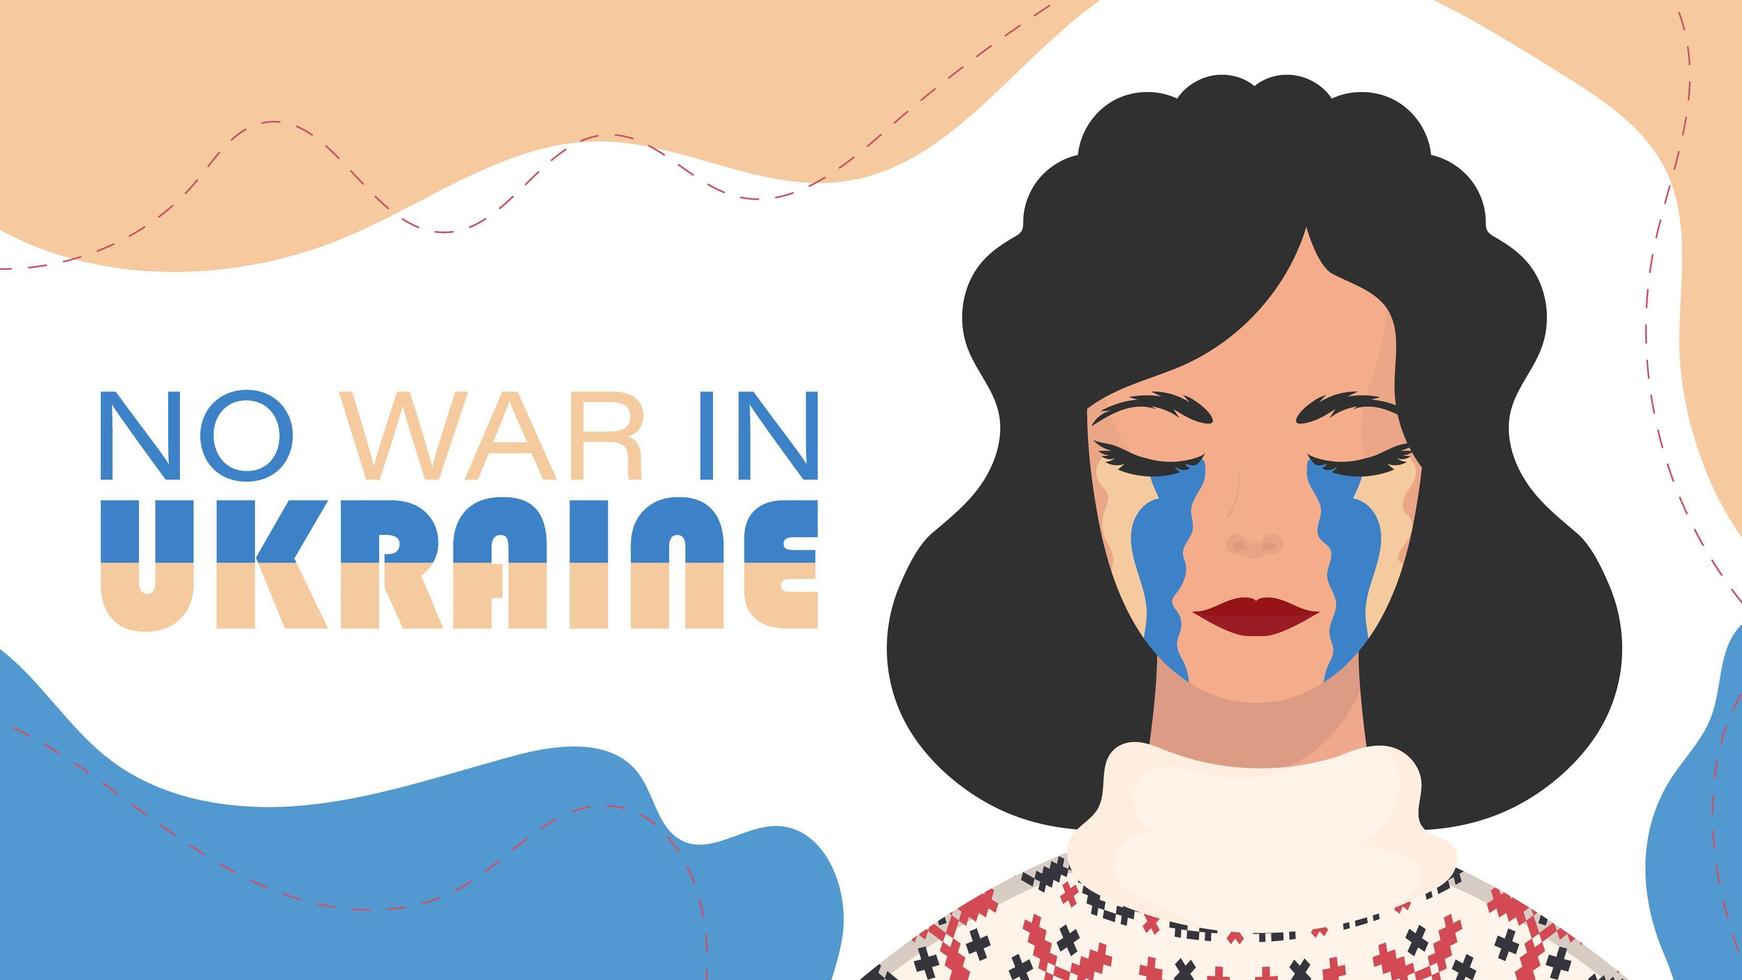 No war in Ukraine. The girl cries in the color of the flag of Ukraine. Vector illustration.